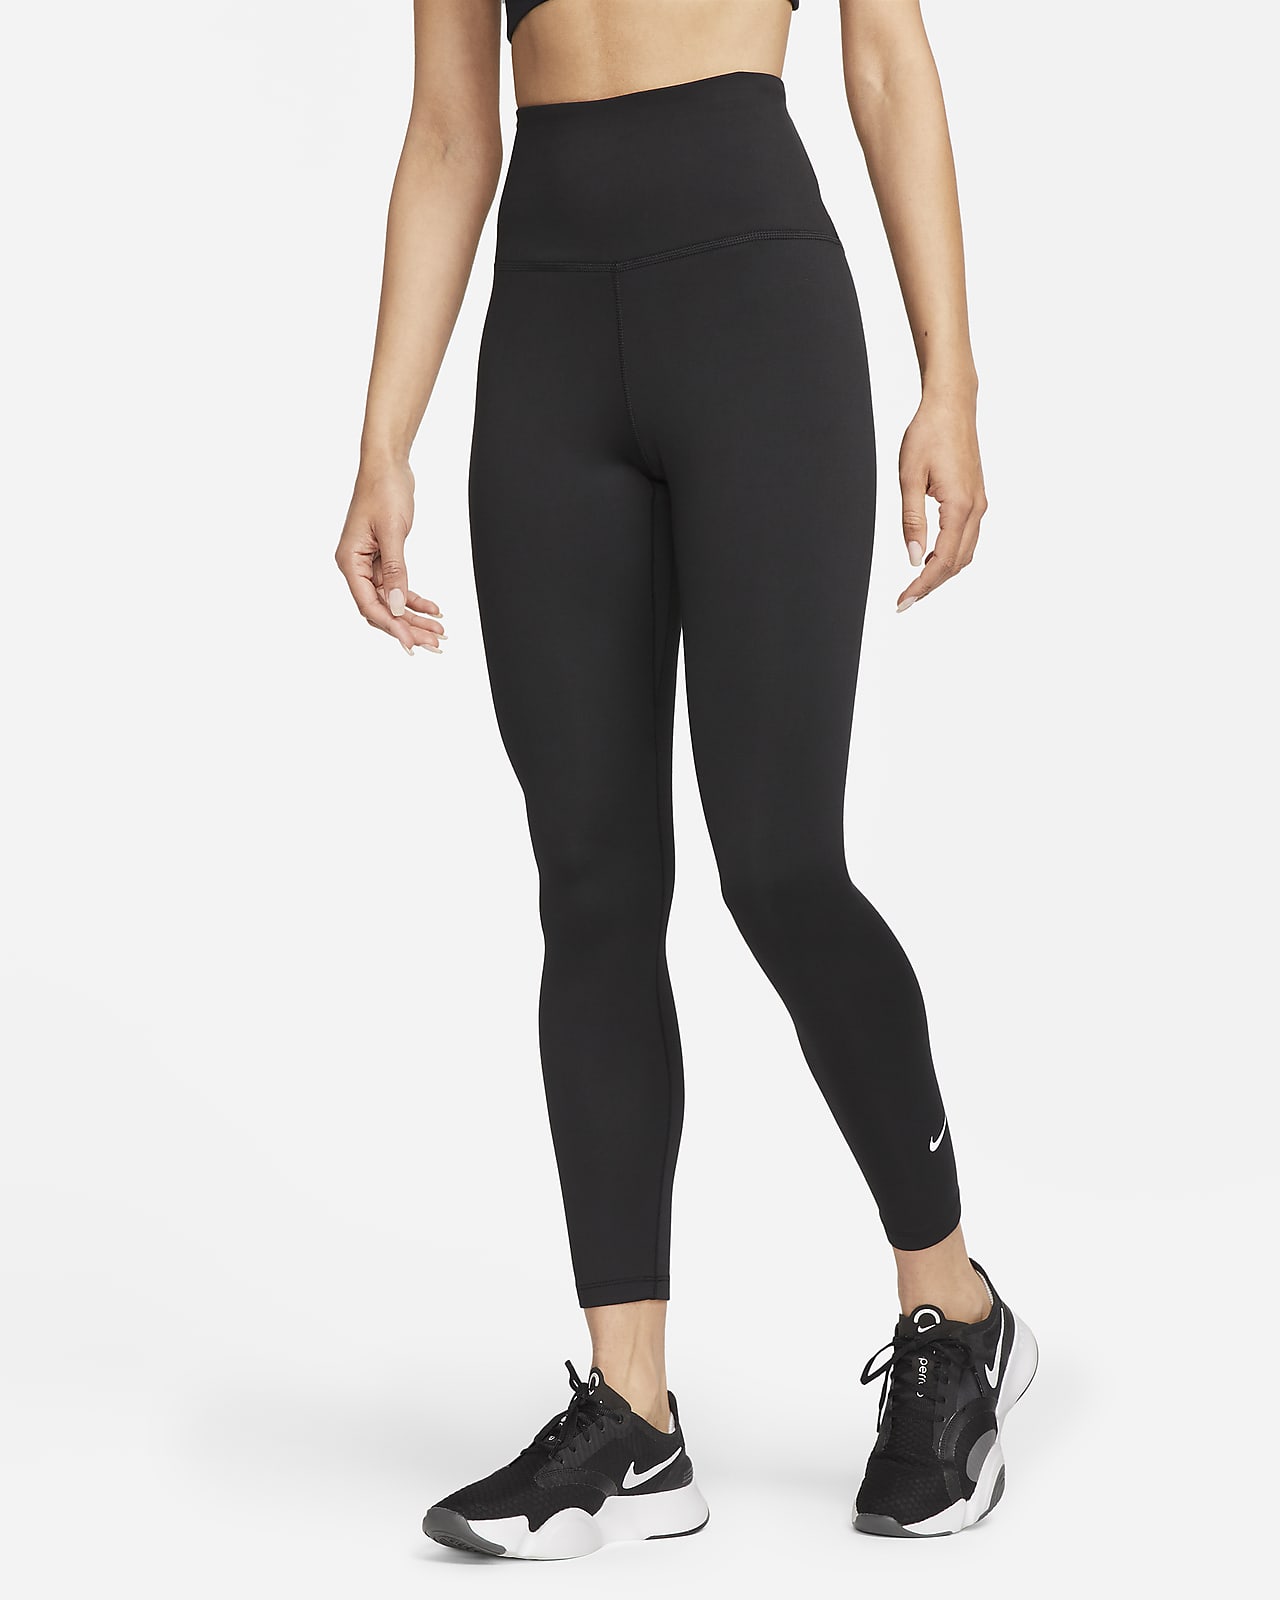 Legging 7/8 taille haute Nike Therma-FIT One pour femme